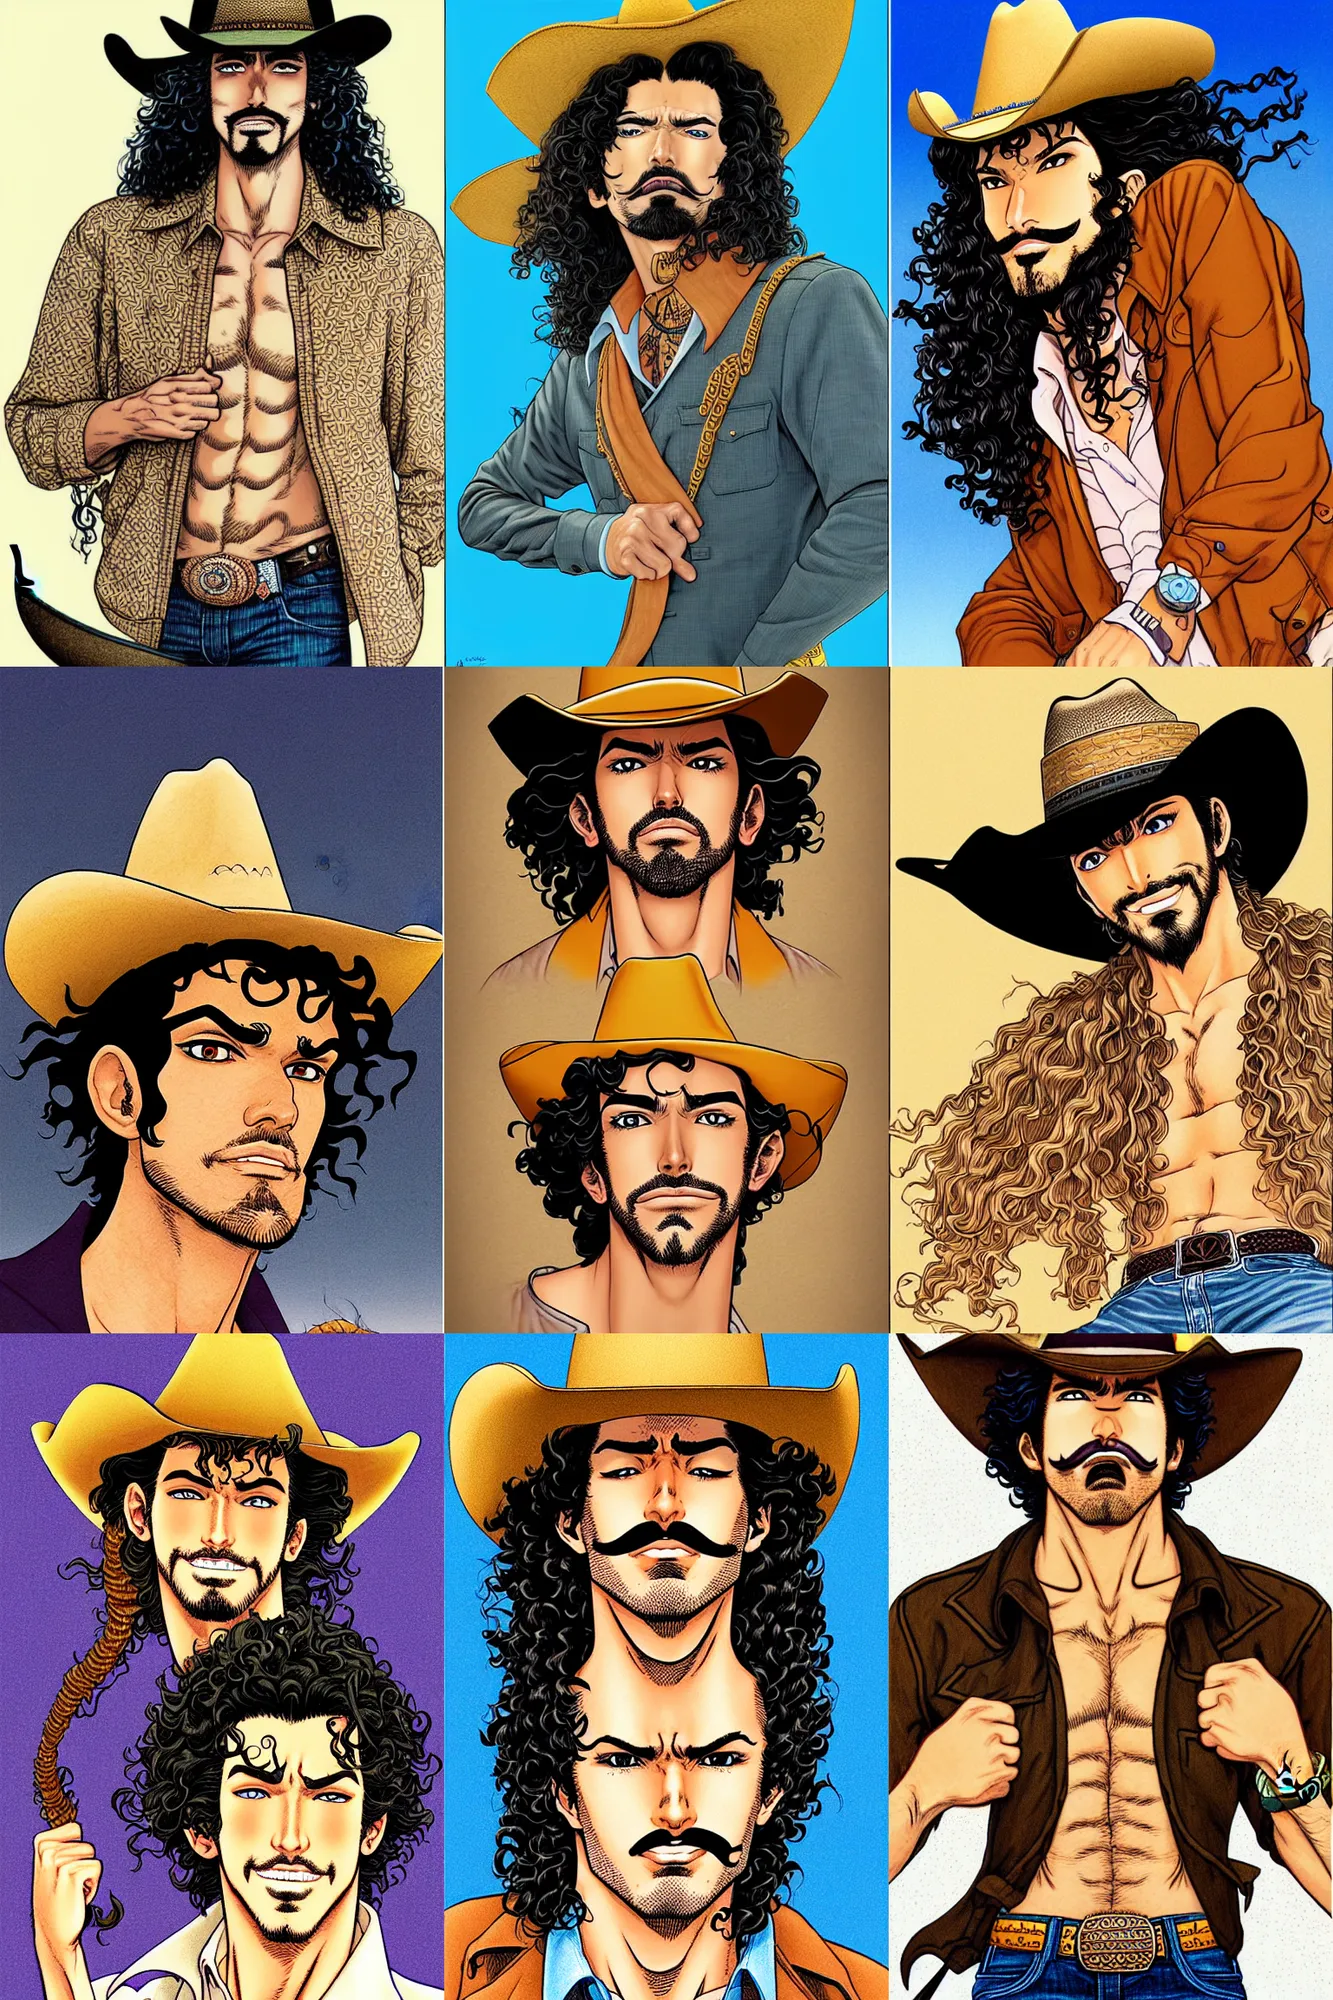 Prompt: illustration of a handsome!! man with long black curly hair, tan skin, anchor goatee | wearing a cowboy hat | art by hirohiko araki & jean giraud & artgerm & jack kirby